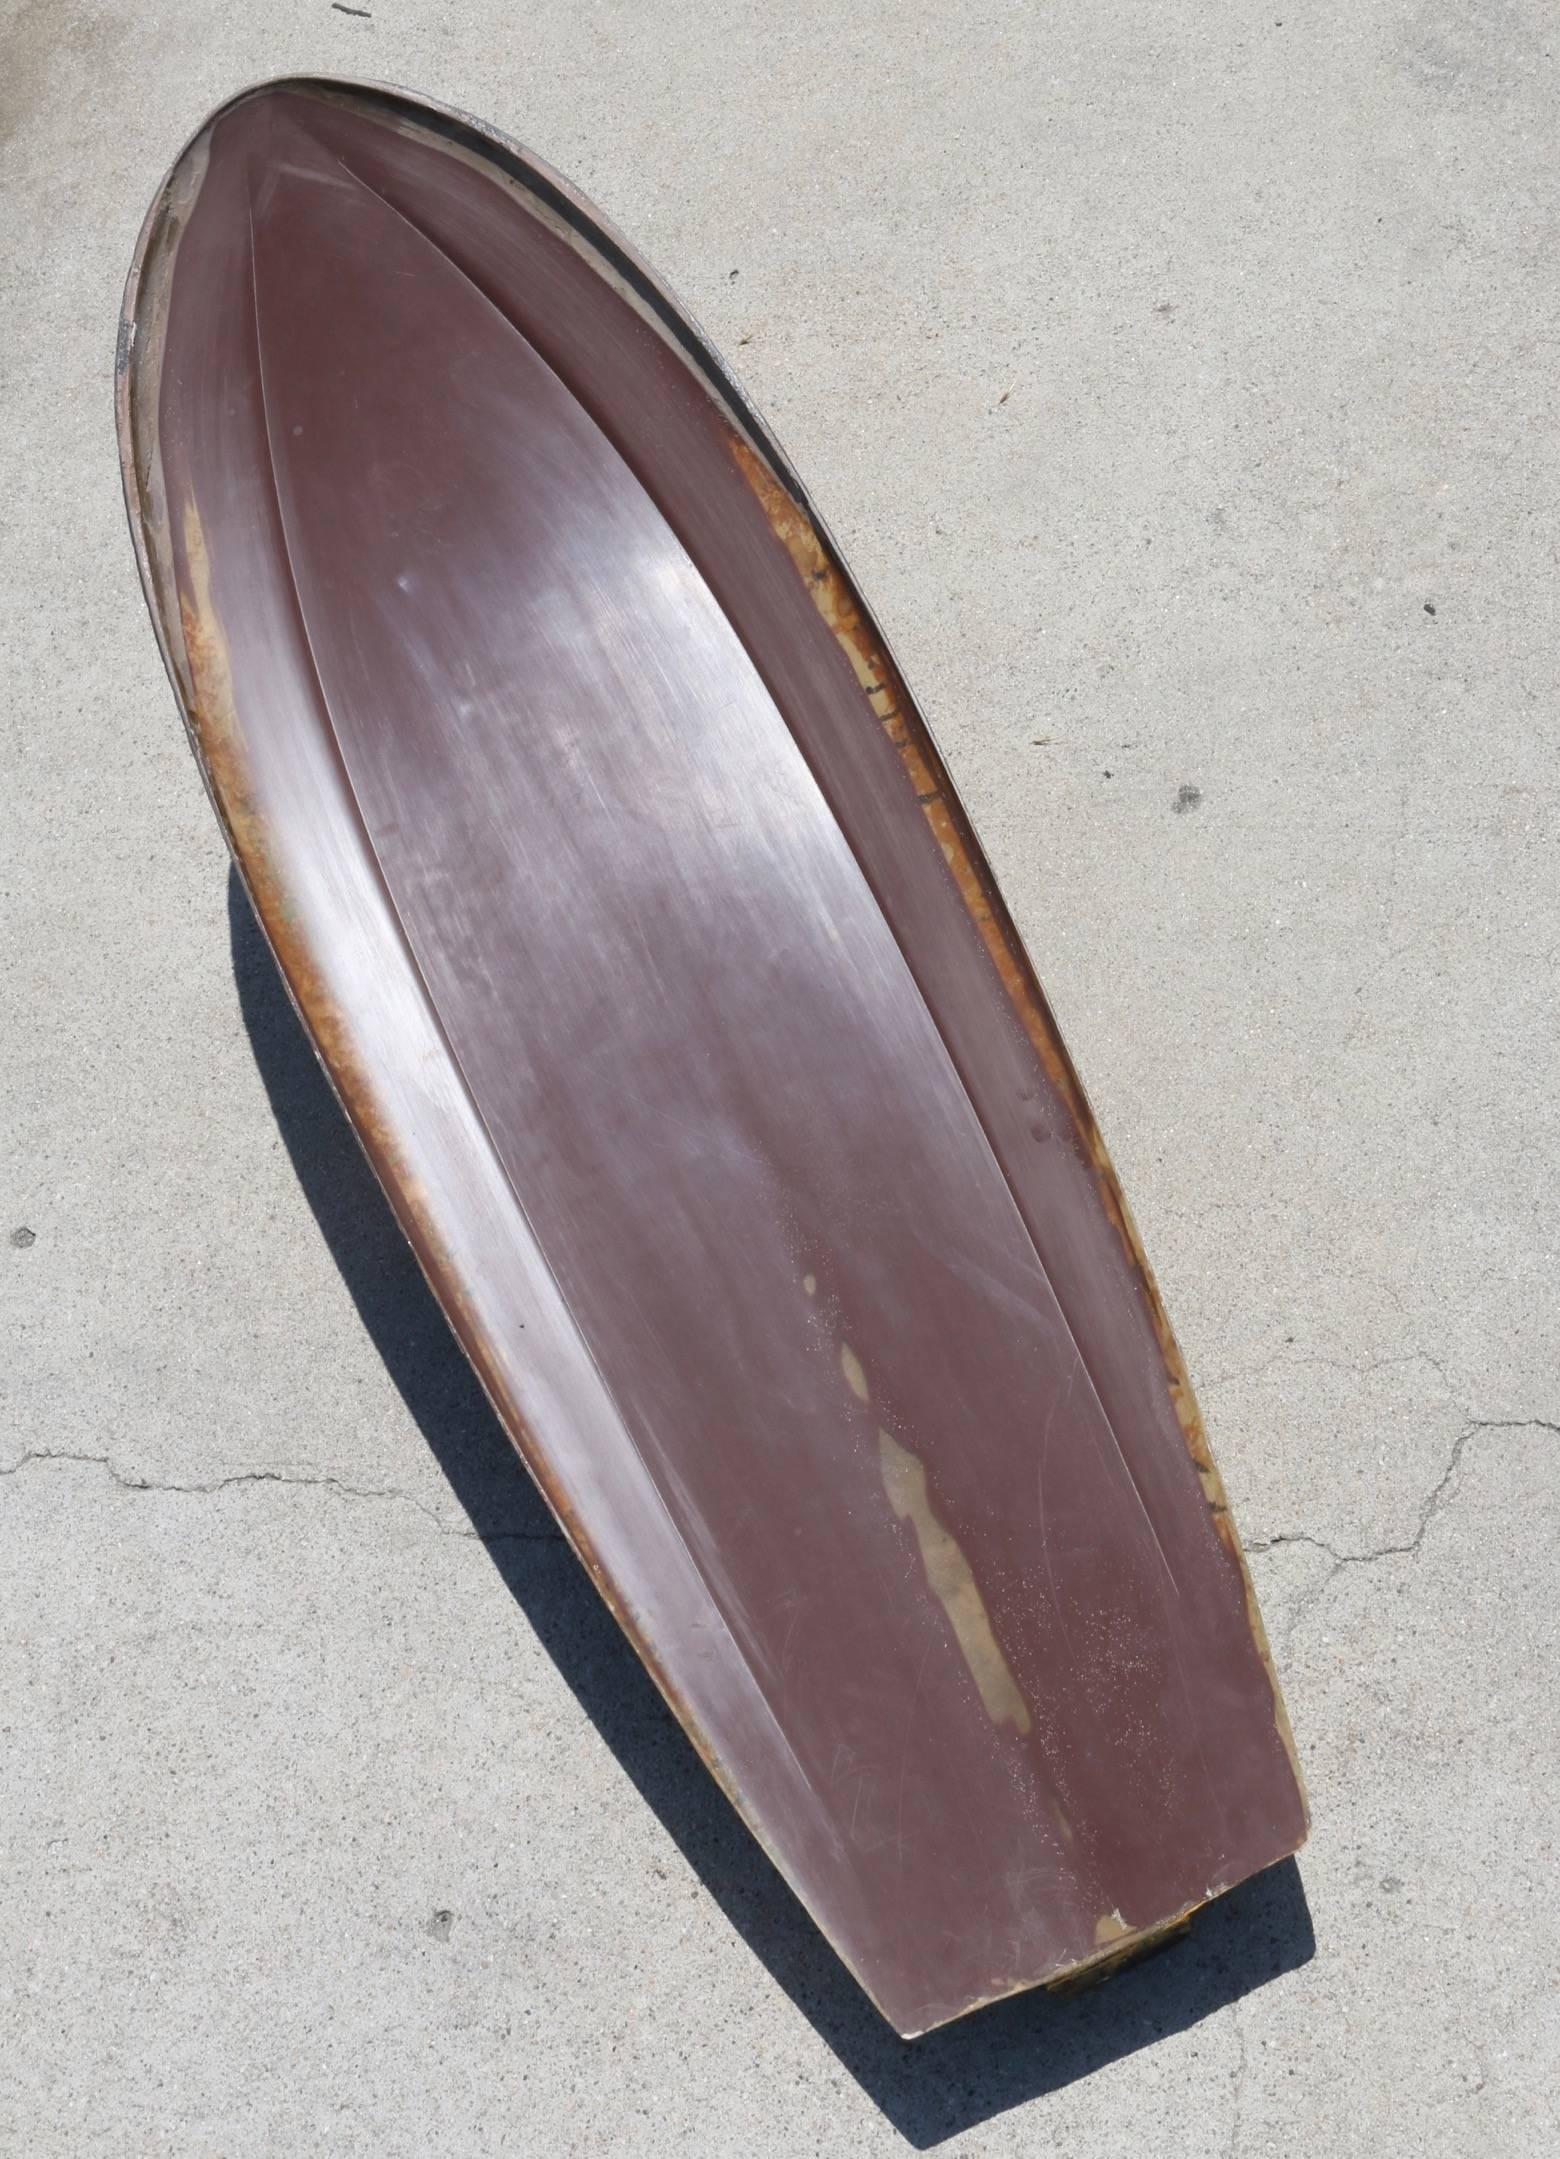 Australian George Greenough Spoon Surfboard Mold 1970s Original Authenticated Collectible For Sale